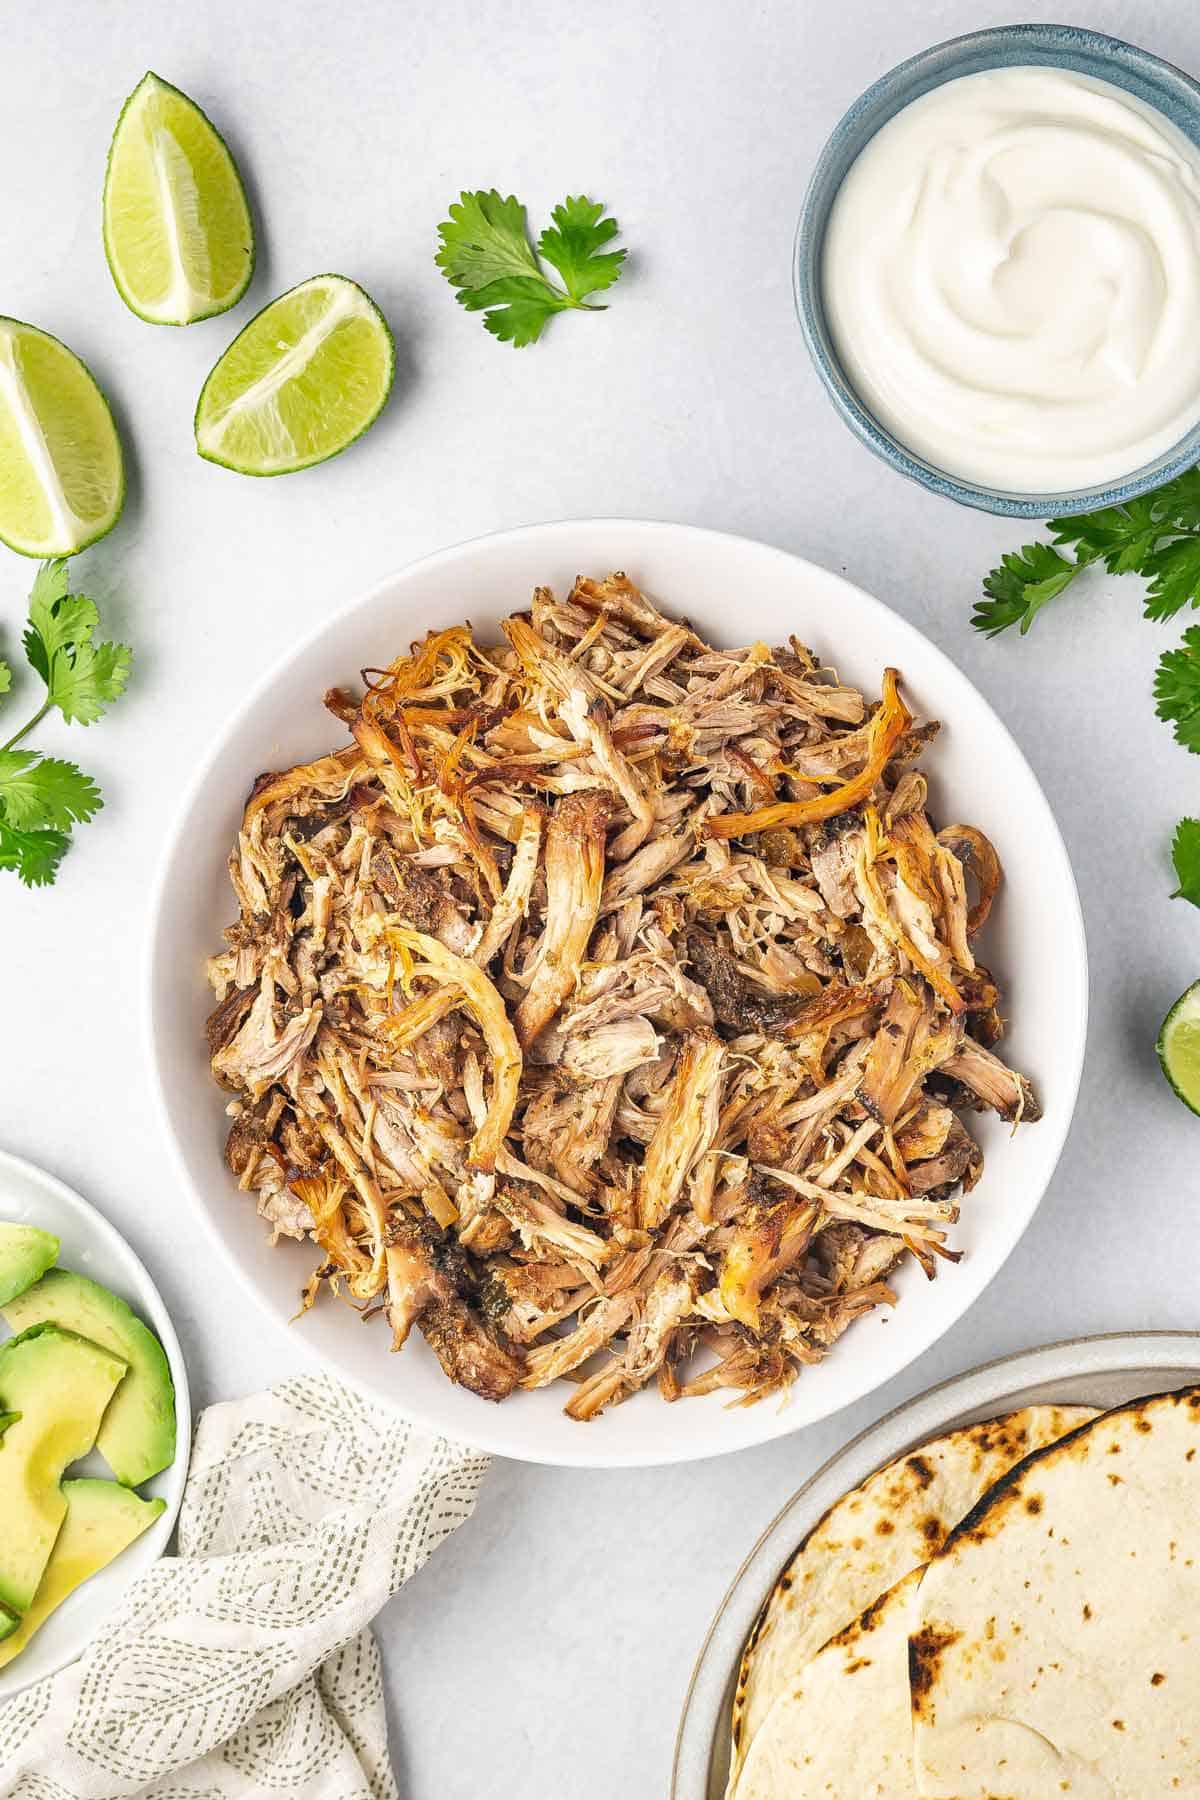 A bowl of shredded slow cooker carnitas with avocados, limes, sour cream, and toasted tortillas on the side.